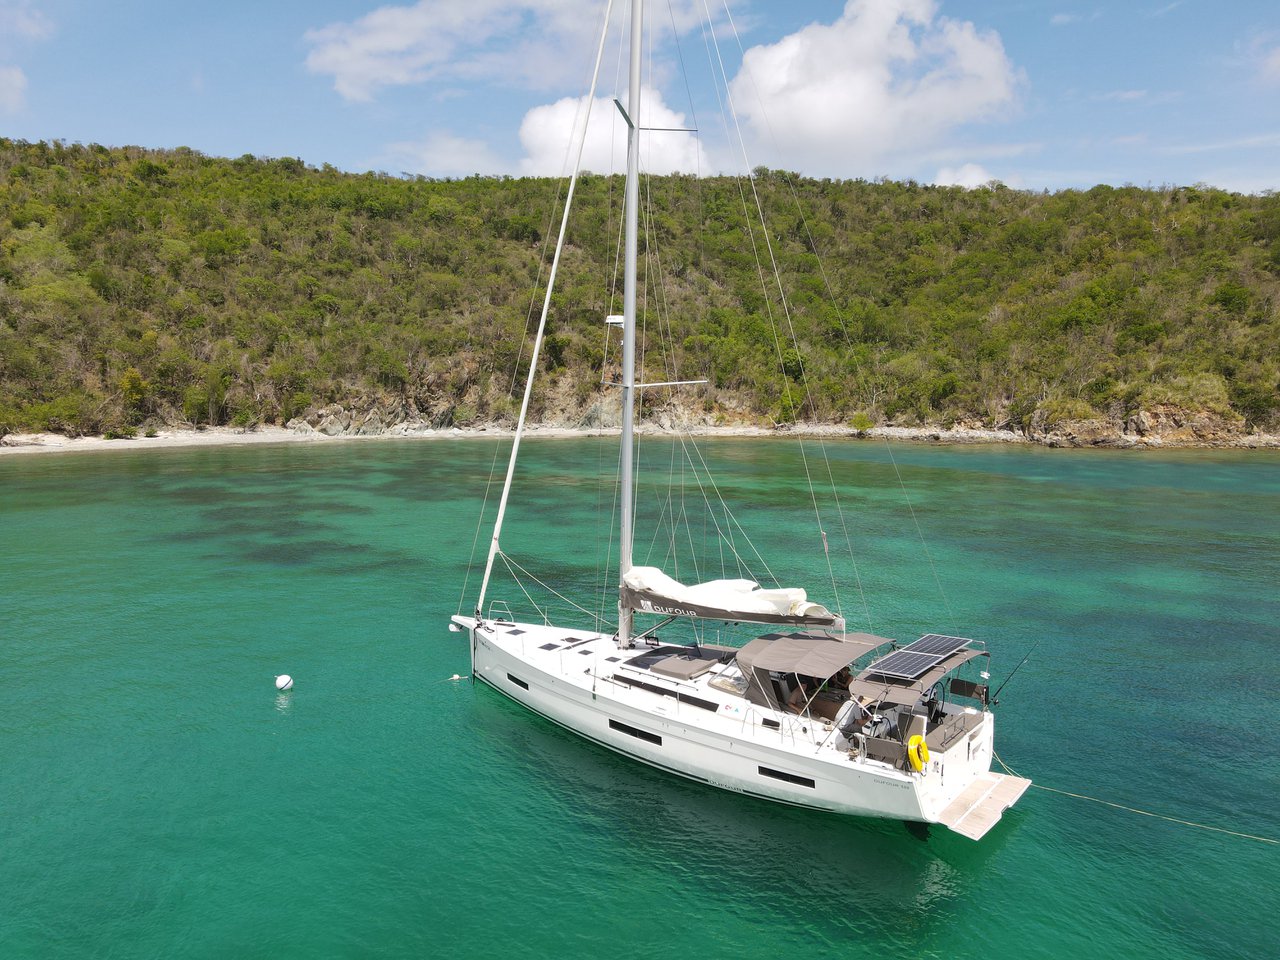 BVI Yacht Charters Dufour 530 Fat Bottom Girl Bareboat on a Mooring in the BVI